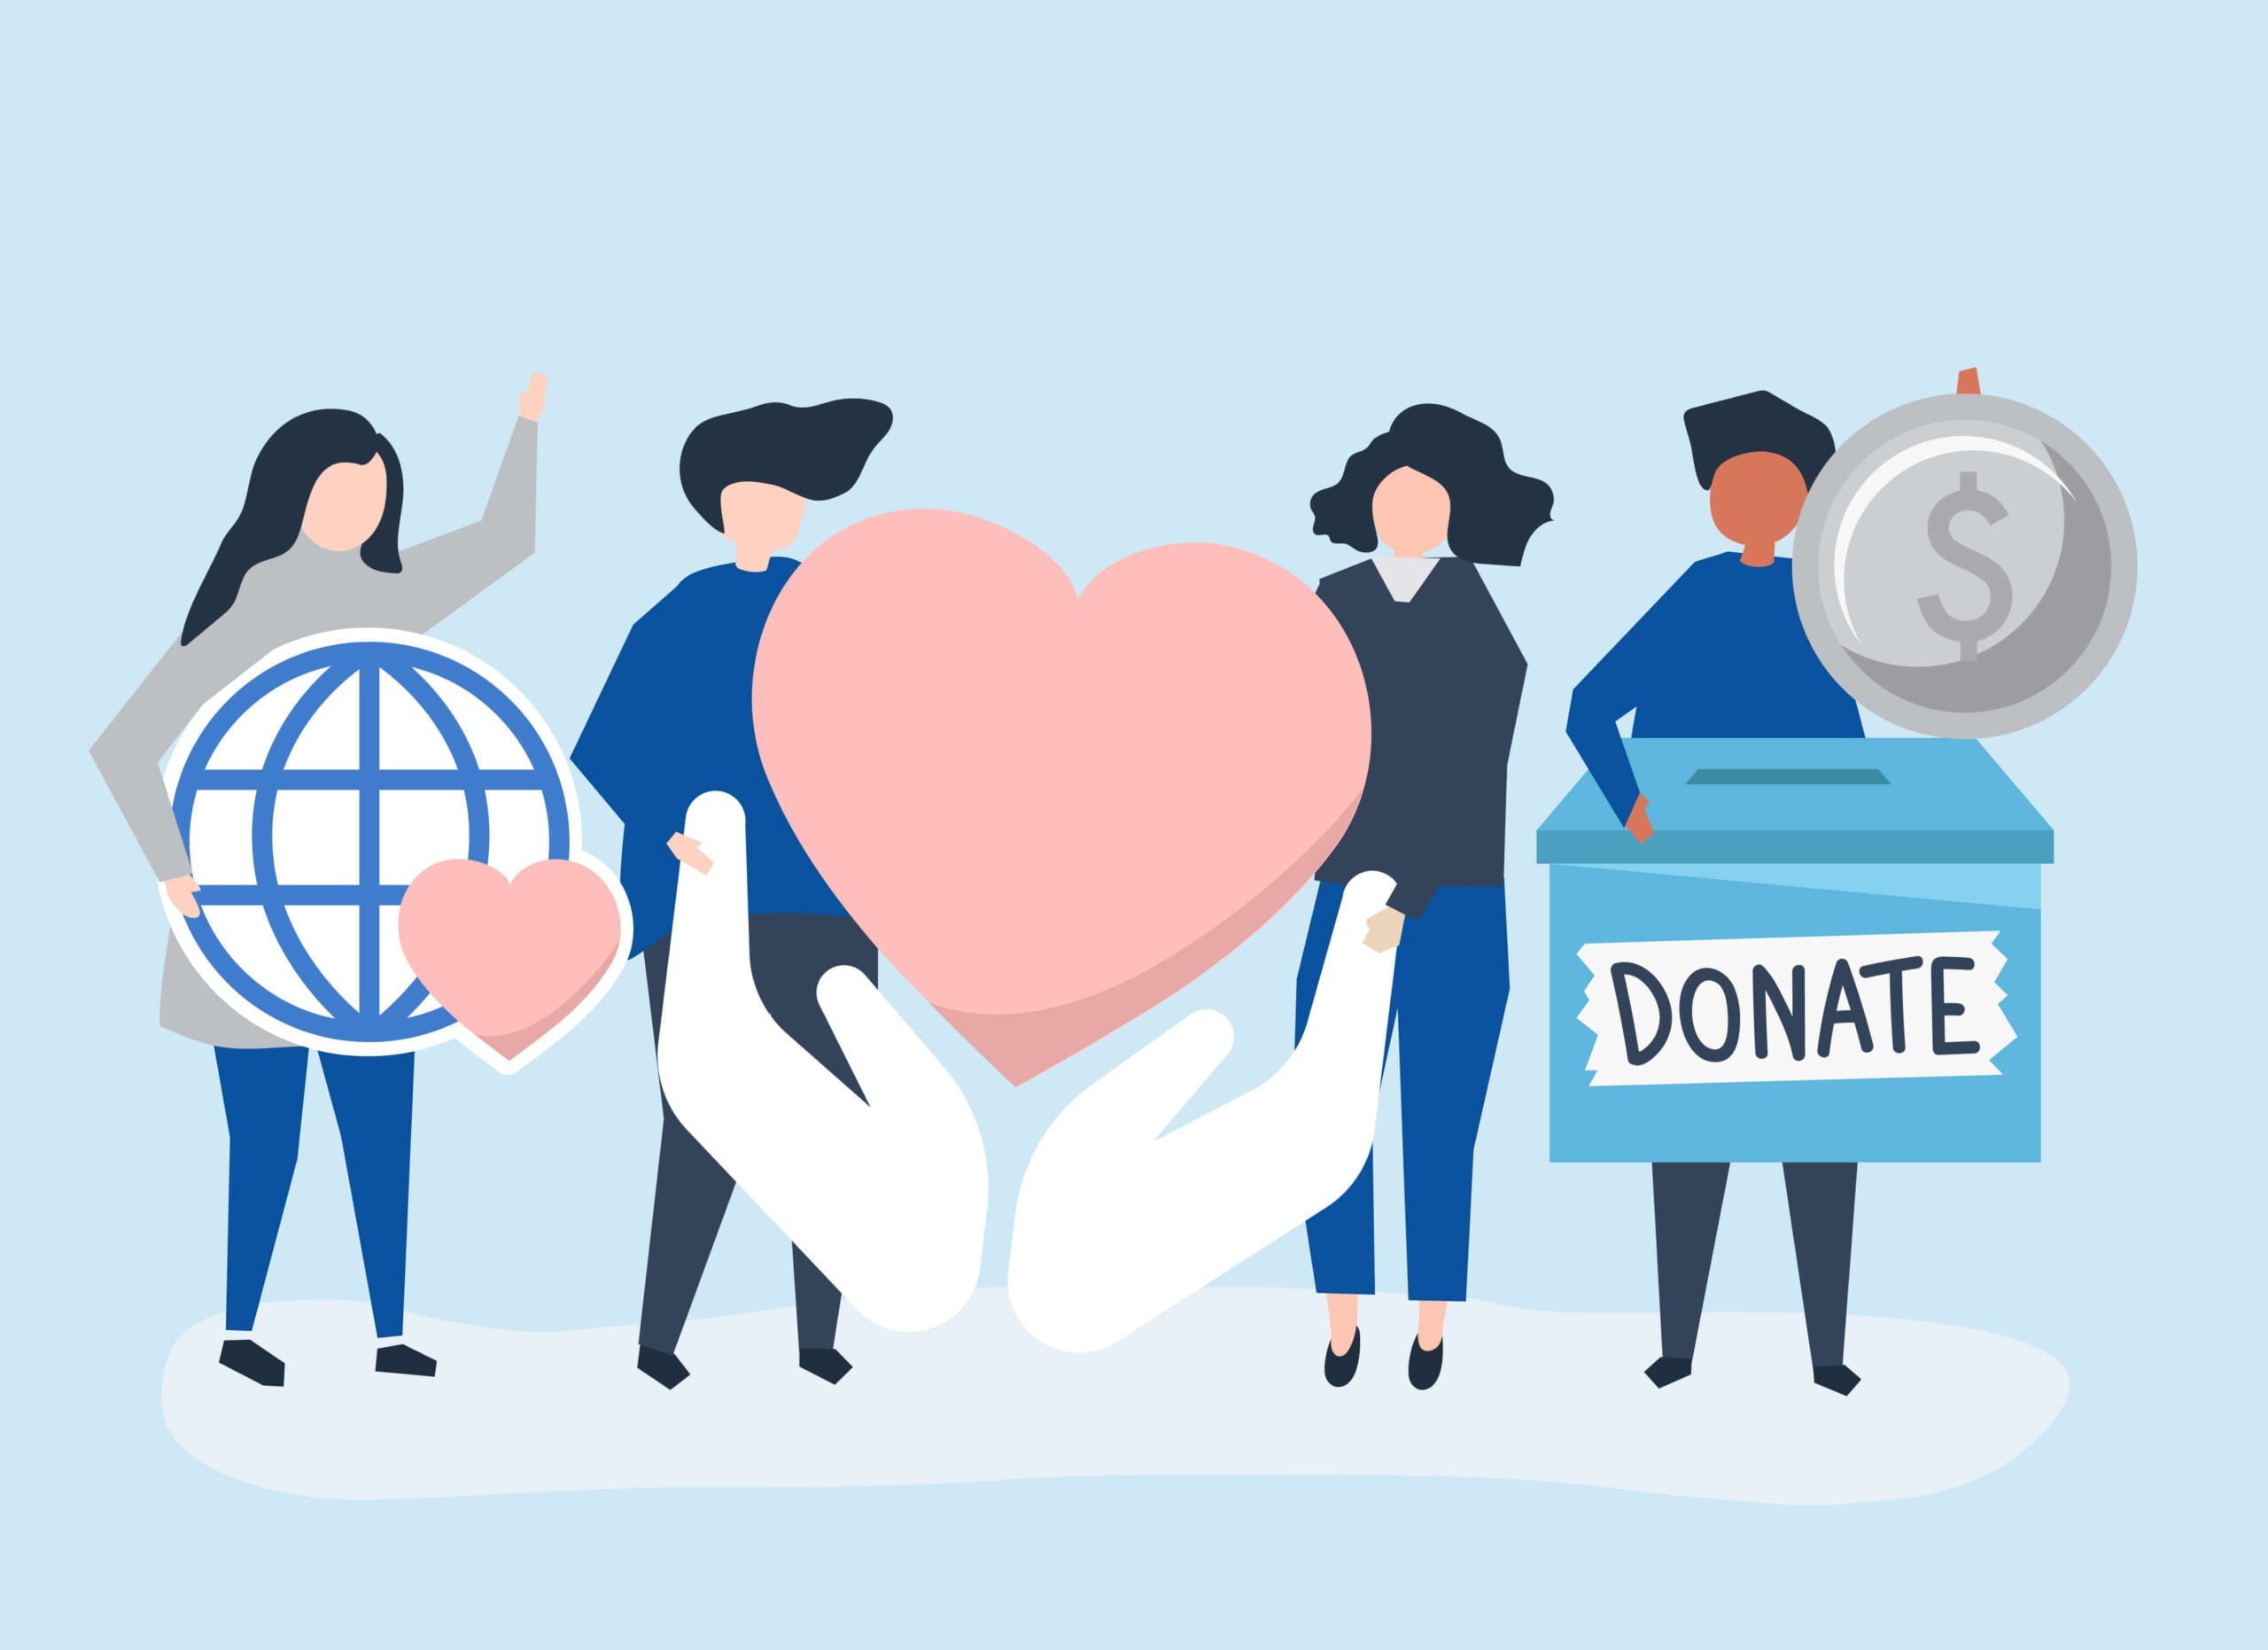 A Complete Guide on Salesforce Experience Cloud for Nonprofits